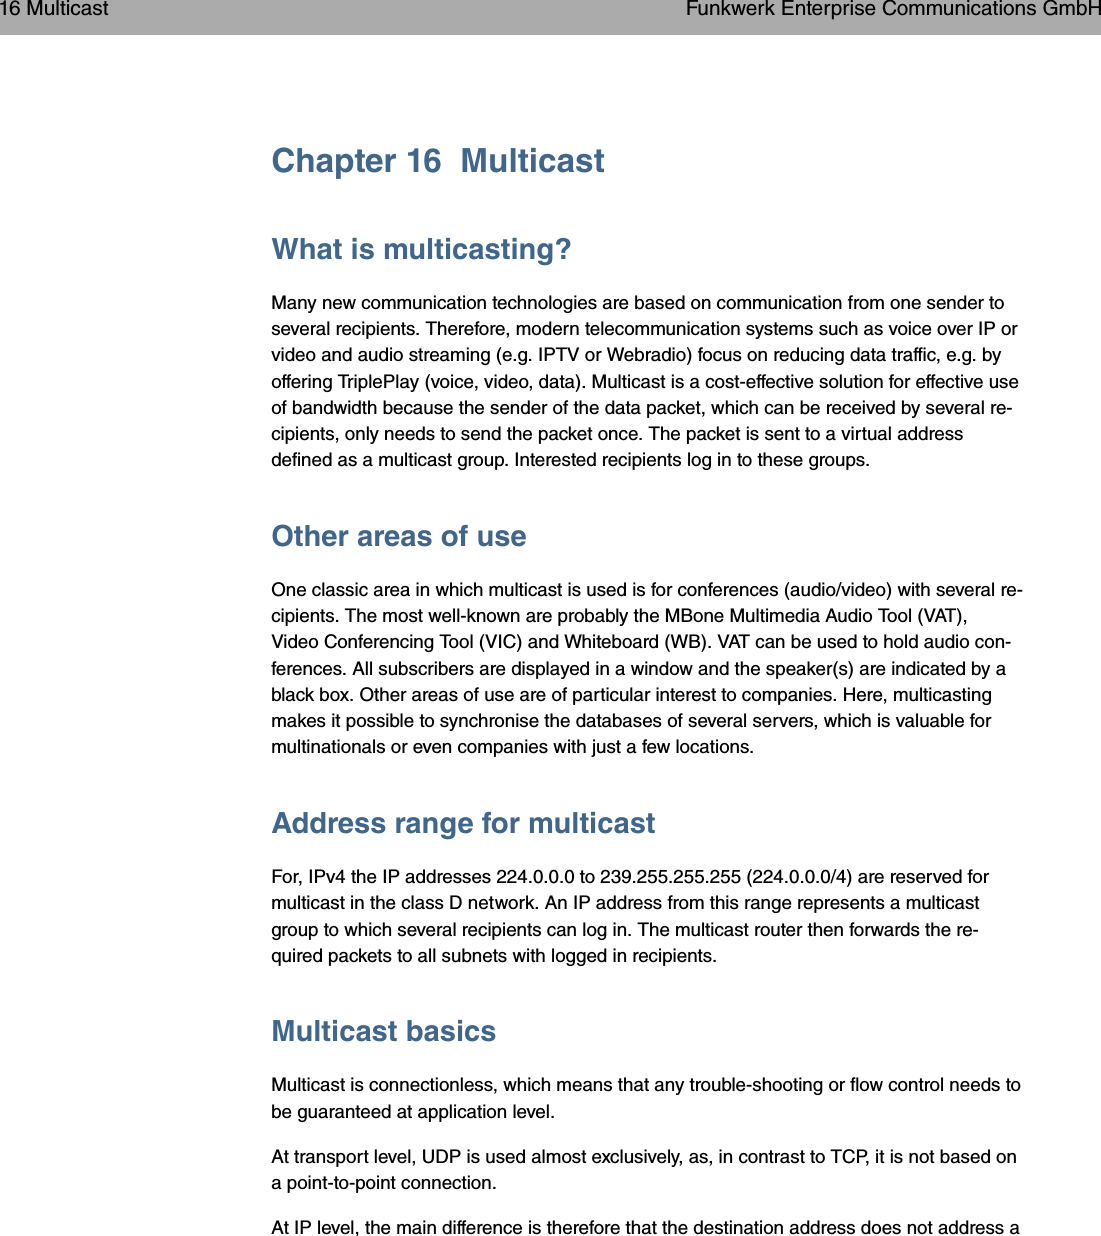 Chapter 16 MulticastWhat is multicasting?Many new communication technologies are based on communication from one sender toseveral recipients. Therefore, modern telecommunication systems such as voice over IP orvideo and audio streaming (e.g. IPTV or Webradio) focus on reducing data traffic, e.g. byoffering TriplePlay (voice, video, data). Multicast is a cost-effective solution for effective useof bandwidth because the sender of the data packet, which can be received by several re-cipients, only needs to send the packet once. The packet is sent to a virtual addressdefined as a multicast group. Interested recipients log in to these groups.Other areas of useOne classic area in which multicast is used is for conferences (audio/video) with several re-cipients. The most well-known are probably the MBone Multimedia Audio Tool (VAT),Video Conferencing Tool (VIC) and Whiteboard (WB). VAT can be used to hold audio con-ferences. All subscribers are displayed in a window and the speaker(s) are indicated by ablack box. Other areas of use are of particular interest to companies. Here, multicastingmakes it possible to synchronise the databases of several servers, which is valuable formultinationals or even companies with just a few locations.Address range for multicastFor, IPv4 the IP addresses 224.0.0.0 to 239.255.255.255 (224.0.0.0/4) are reserved formulticast in the class D network. An IP address from this range represents a multicastgroup to which several recipients can log in. The multicast router then forwards the re-quired packets to all subnets with logged in recipients.Multicast basicsMulticast is connectionless, which means that any trouble-shooting or flow control needs tobe guaranteed at application level.At transport level, UDP is used almost exclusively, as, in contrast to TCP, it is not based ona point-to-point connection.At IP level, the main difference is therefore that the destination address does not address a16 Multicast Funkwerk Enterprise Communications GmbH204 bintec WLAN and Industrial WLAN